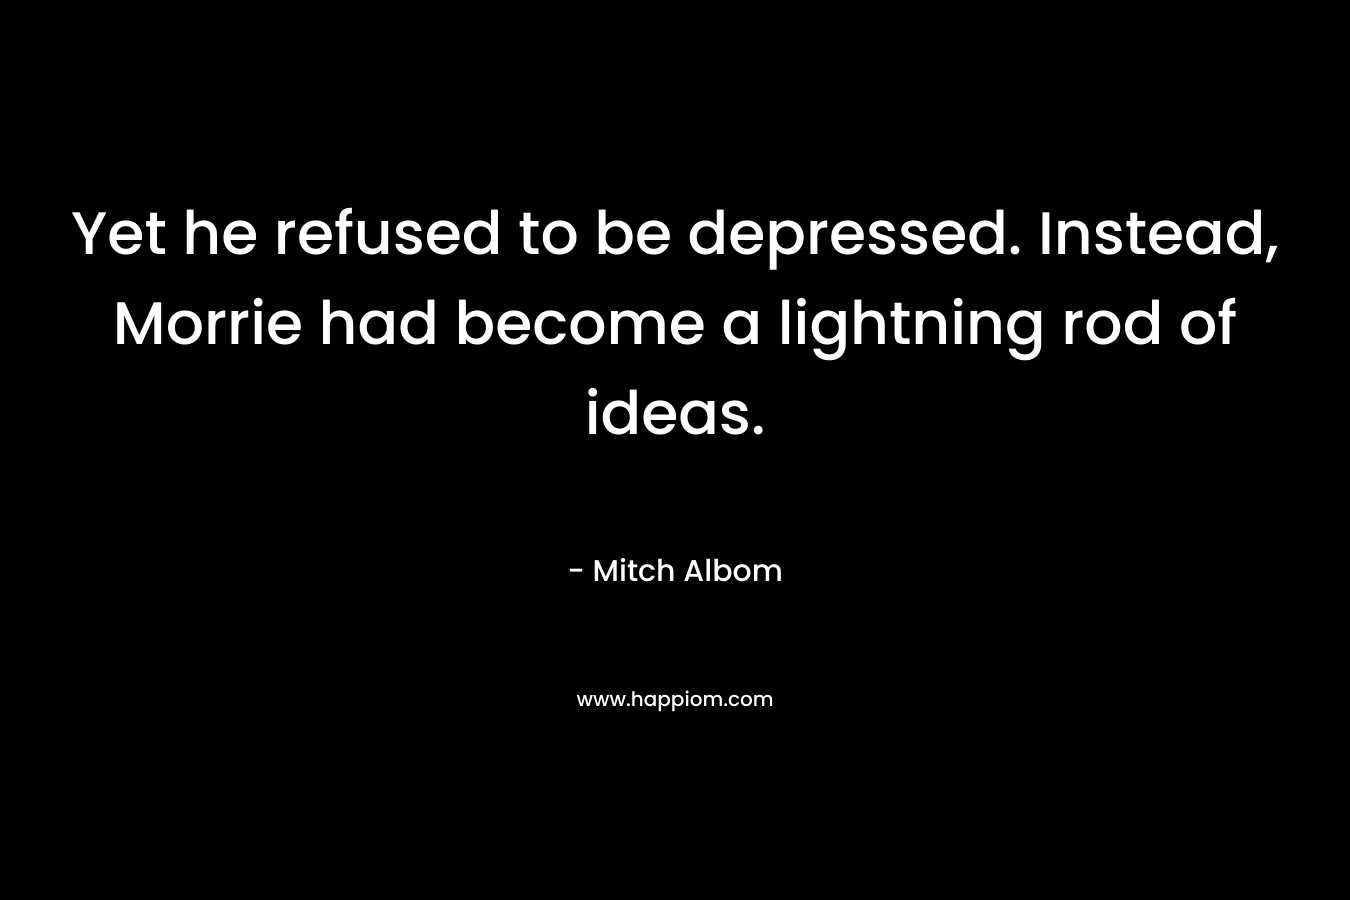 Yet he refused to be depressed. Instead, Morrie had become a lightning rod of ideas. – Mitch Albom